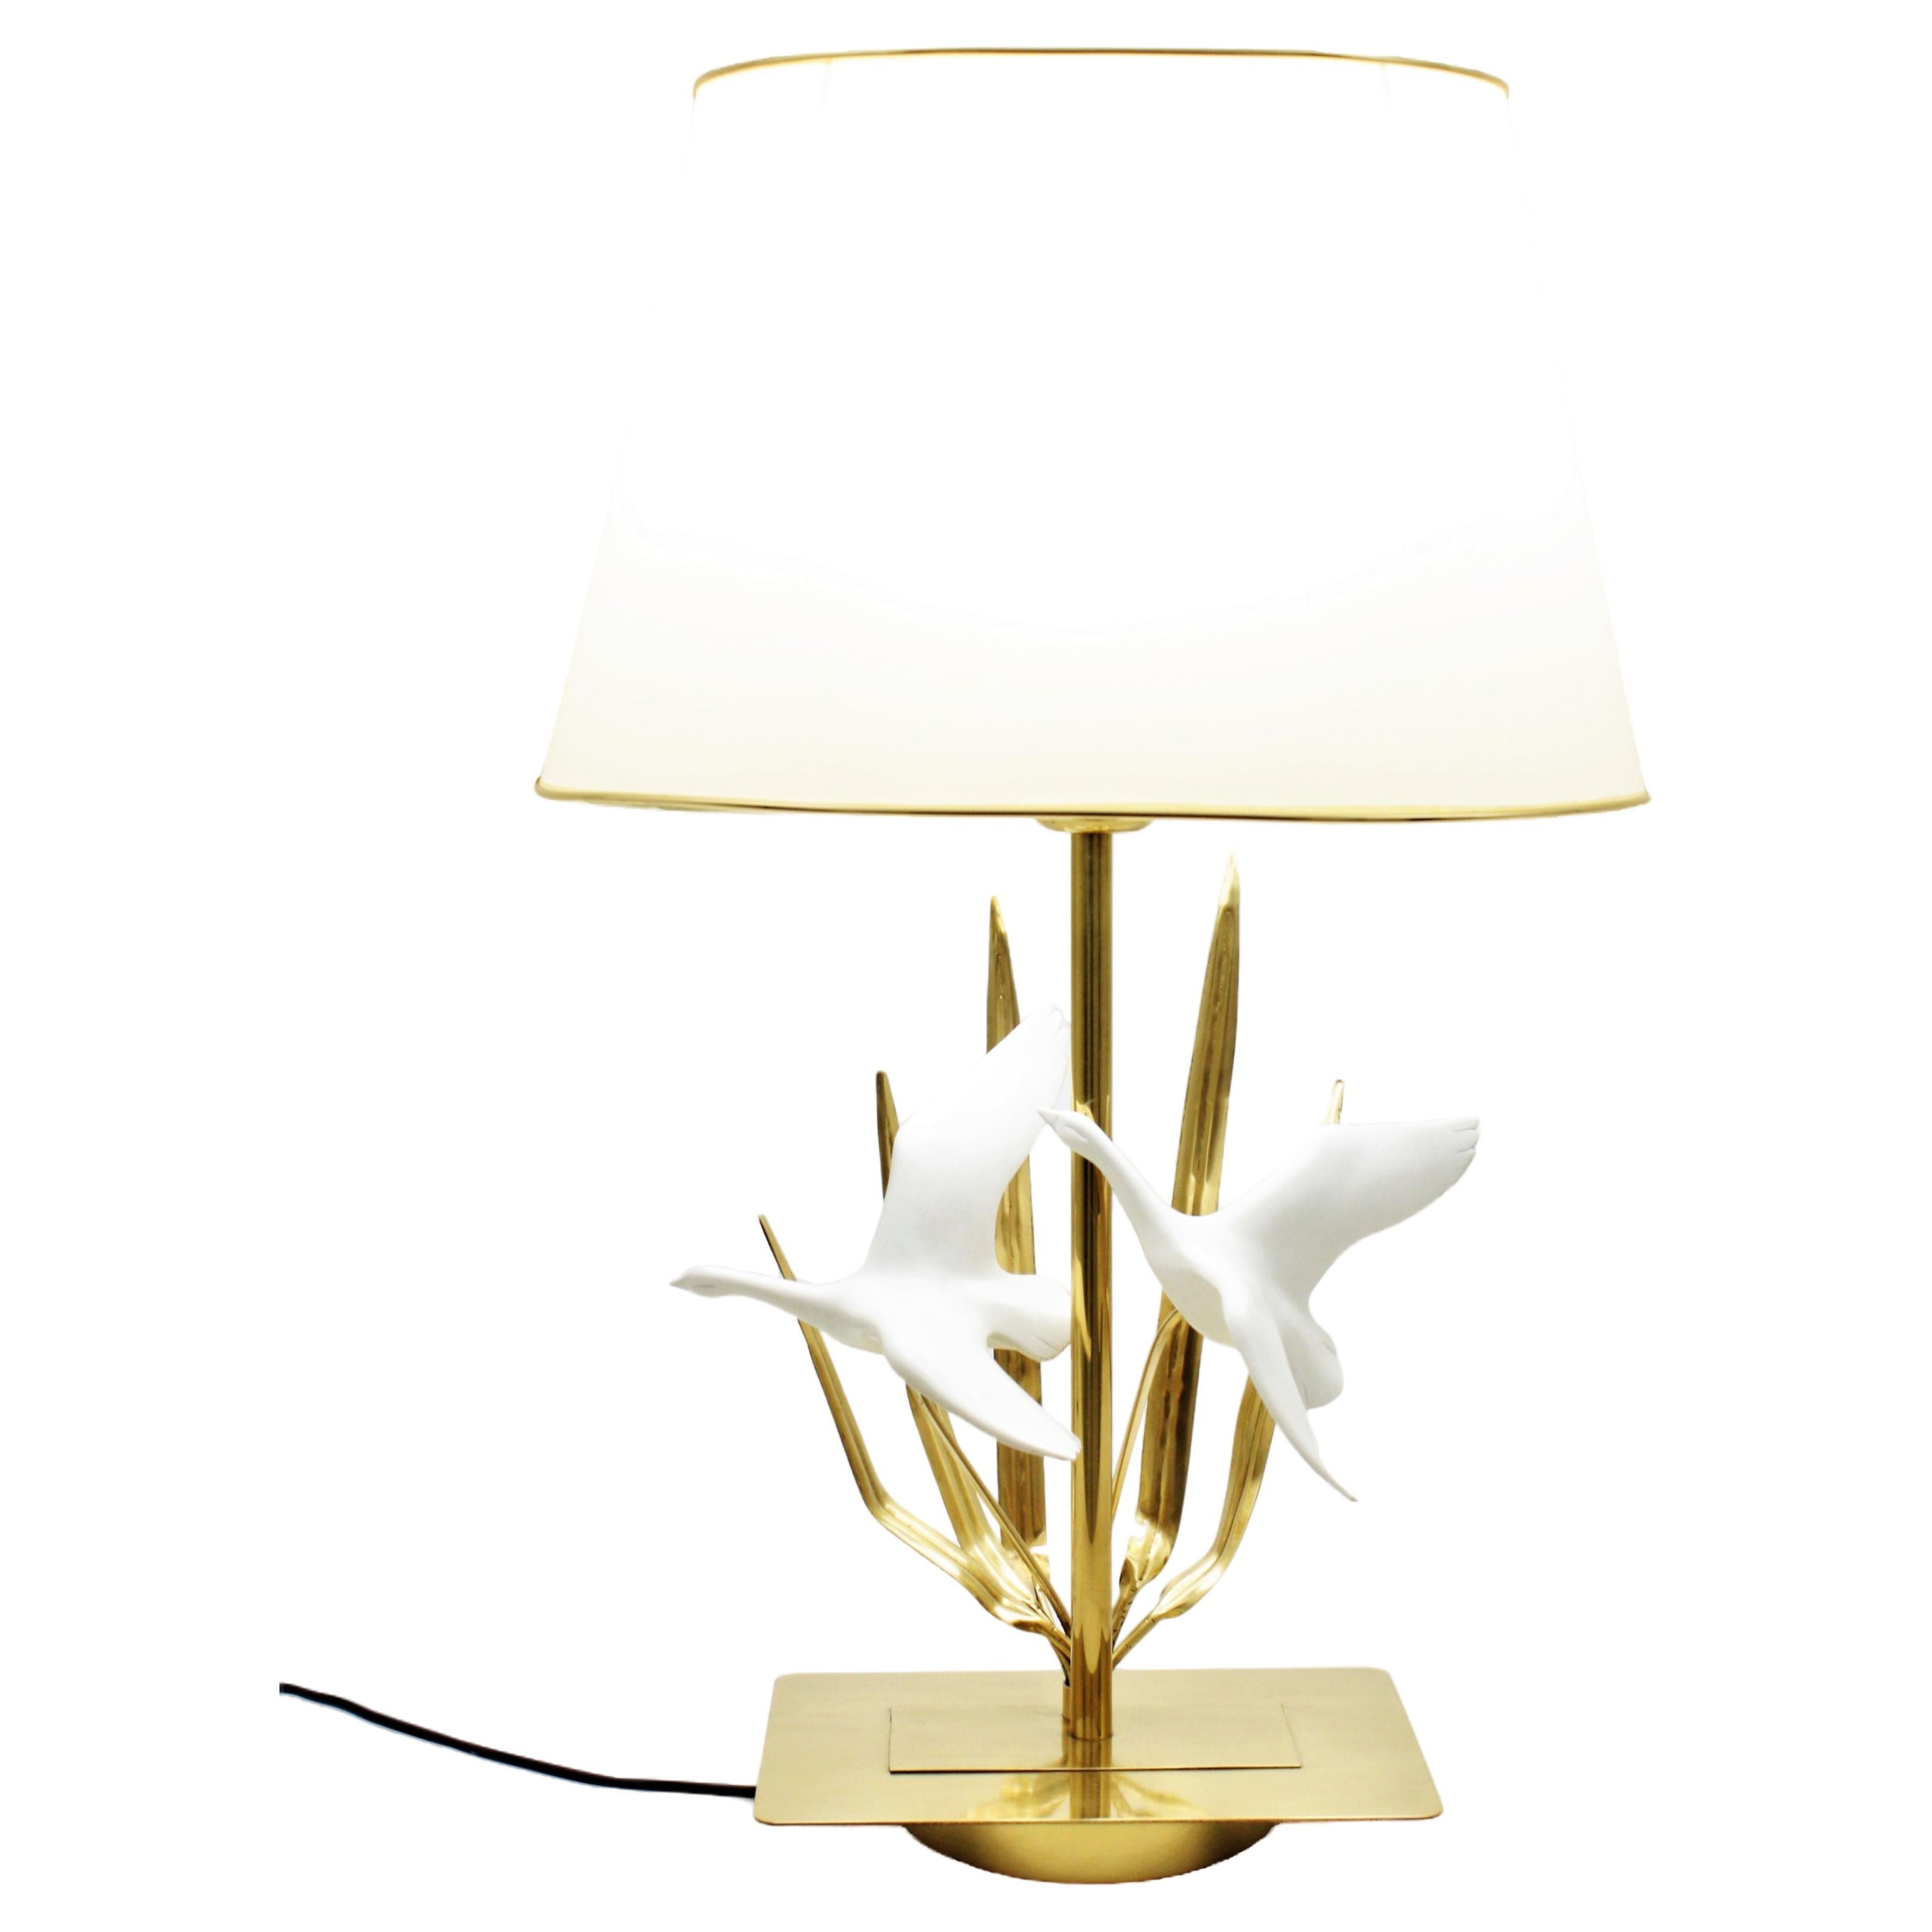 French Midcentury Brass Table Lamp with Flying Birds Motif